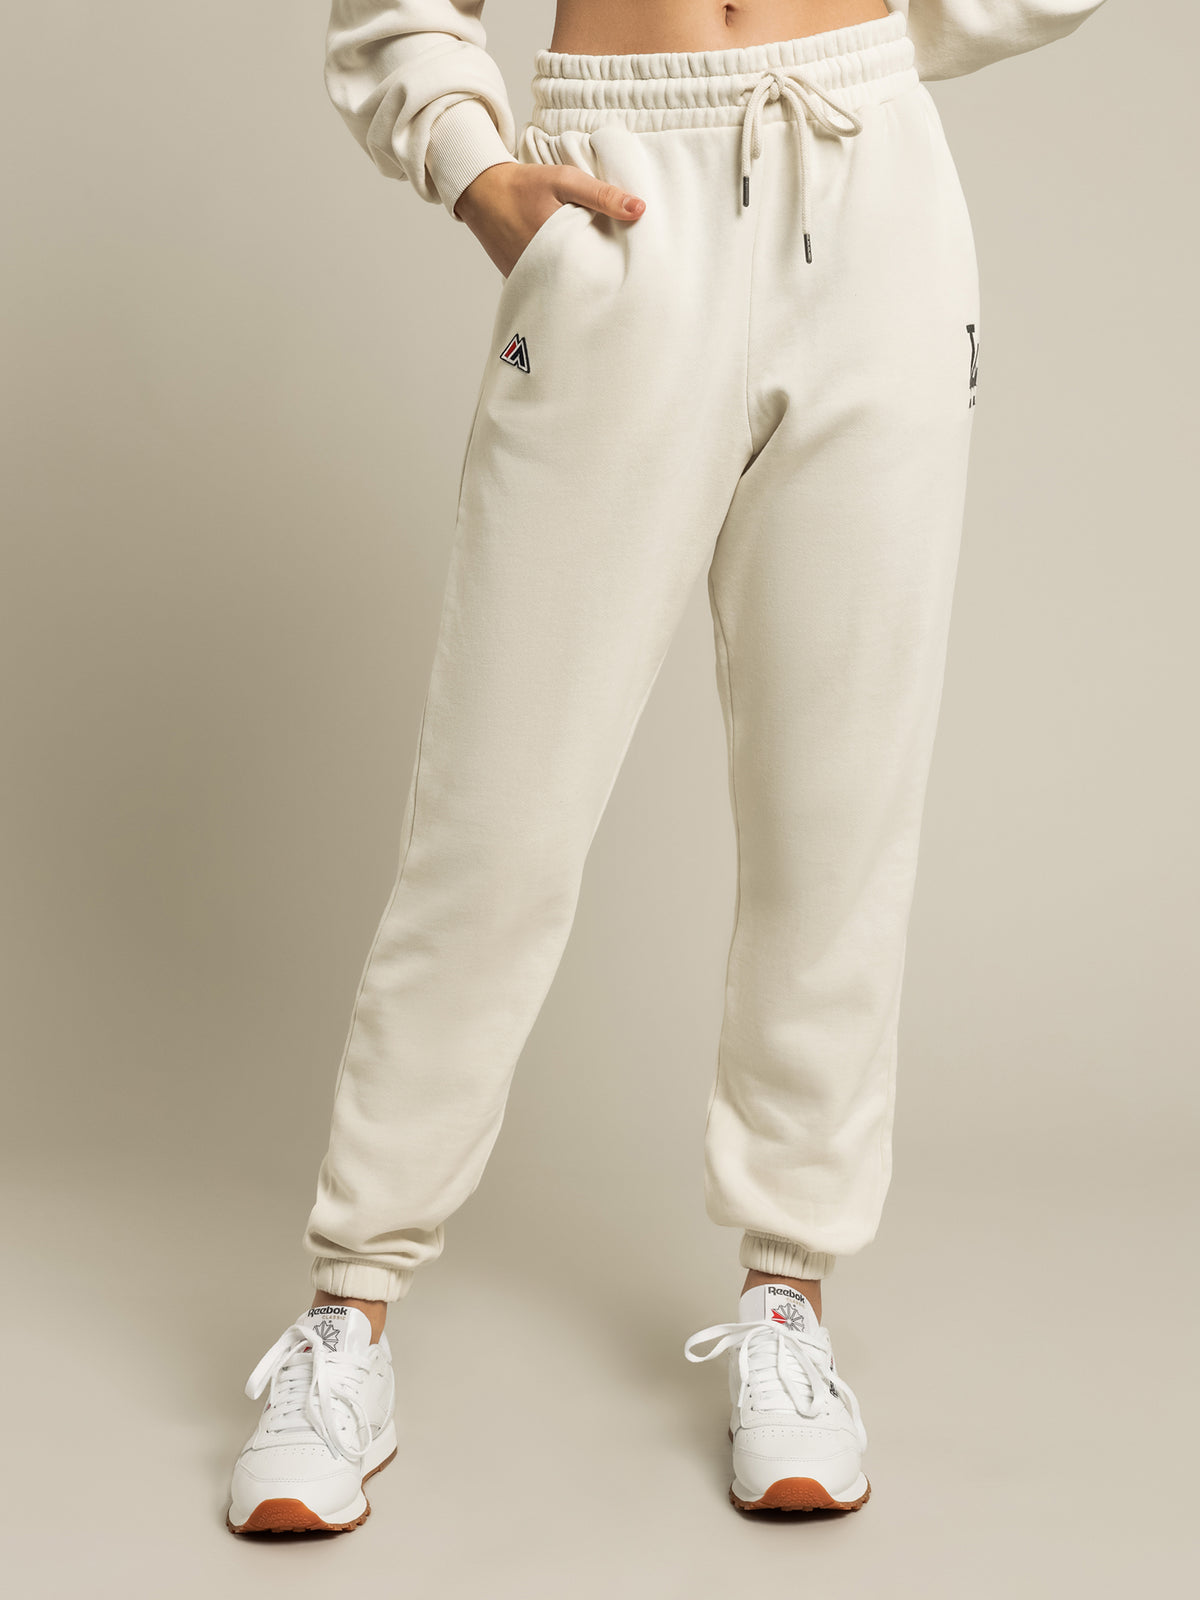 Players LA Dodgers Trackpants in Unbleached